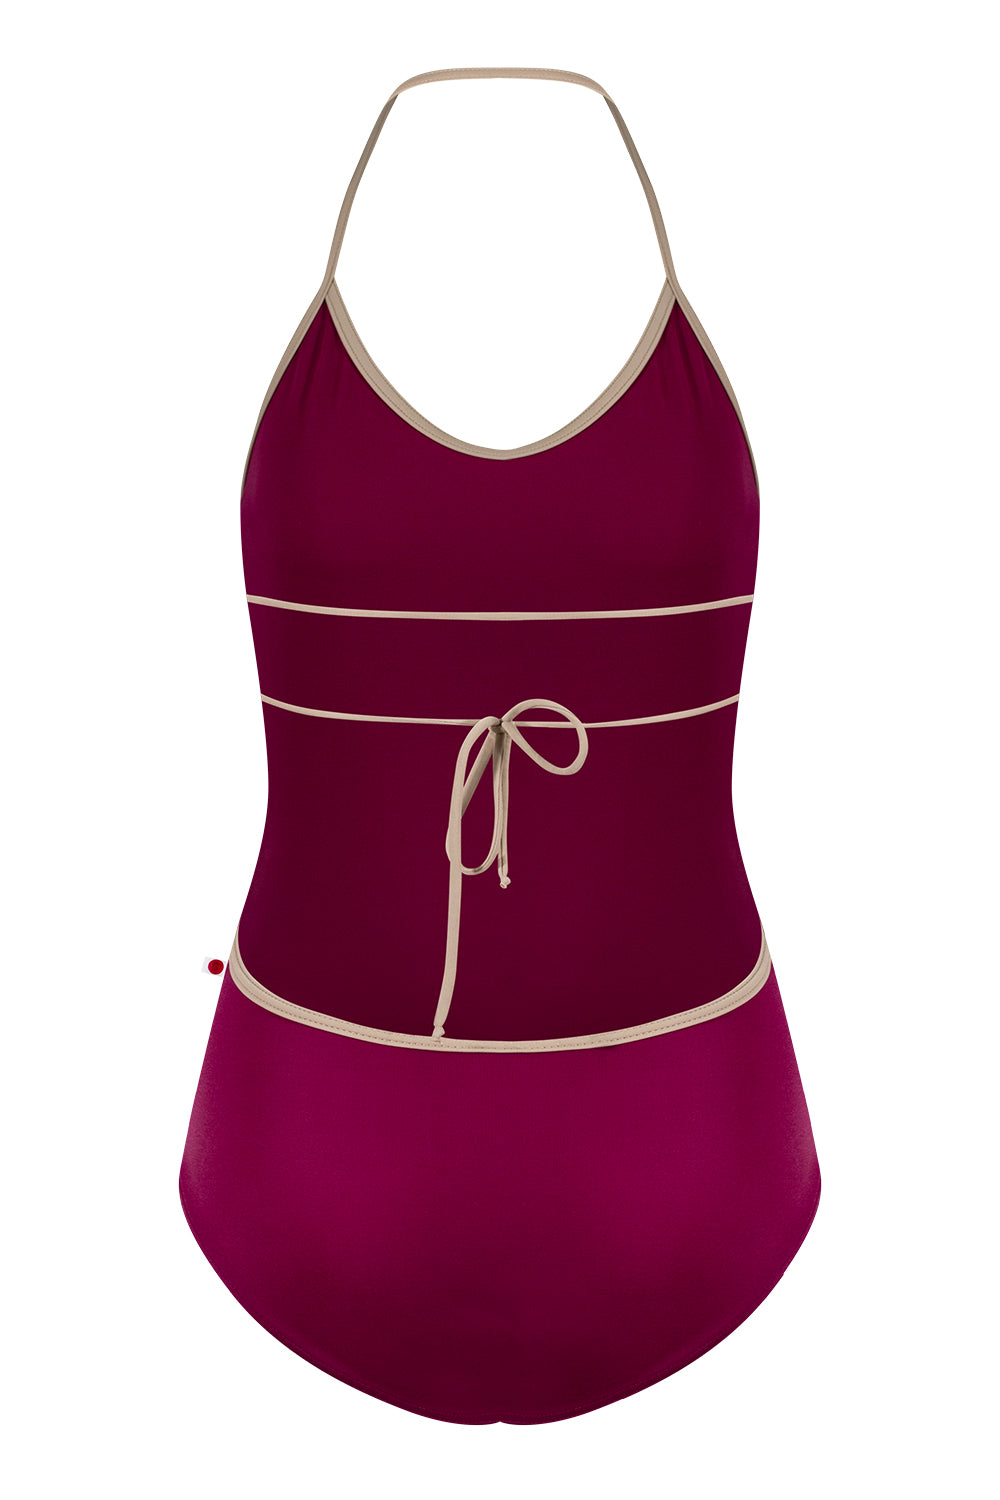 Kate leotard in T-Maroon body color with T-Mosaic trim color